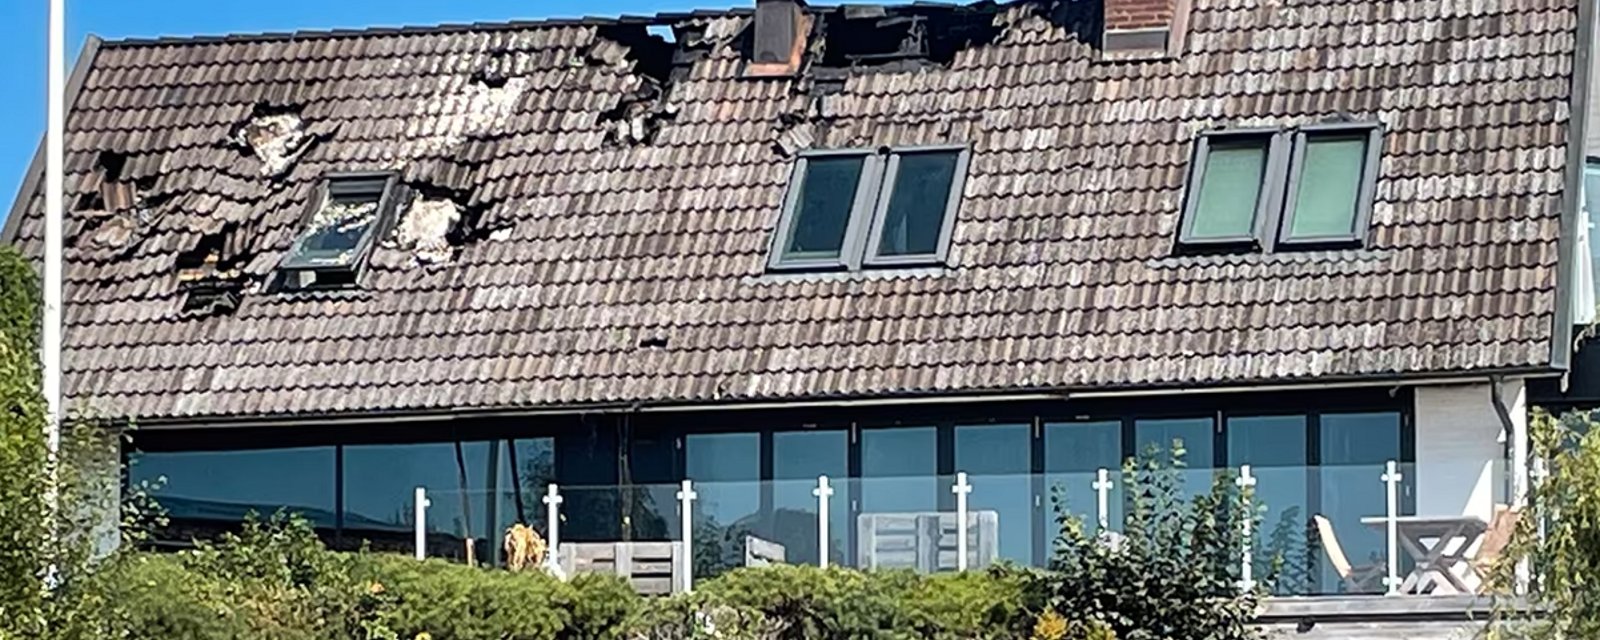 Hampus Lindholm's home destroyed in a fire.